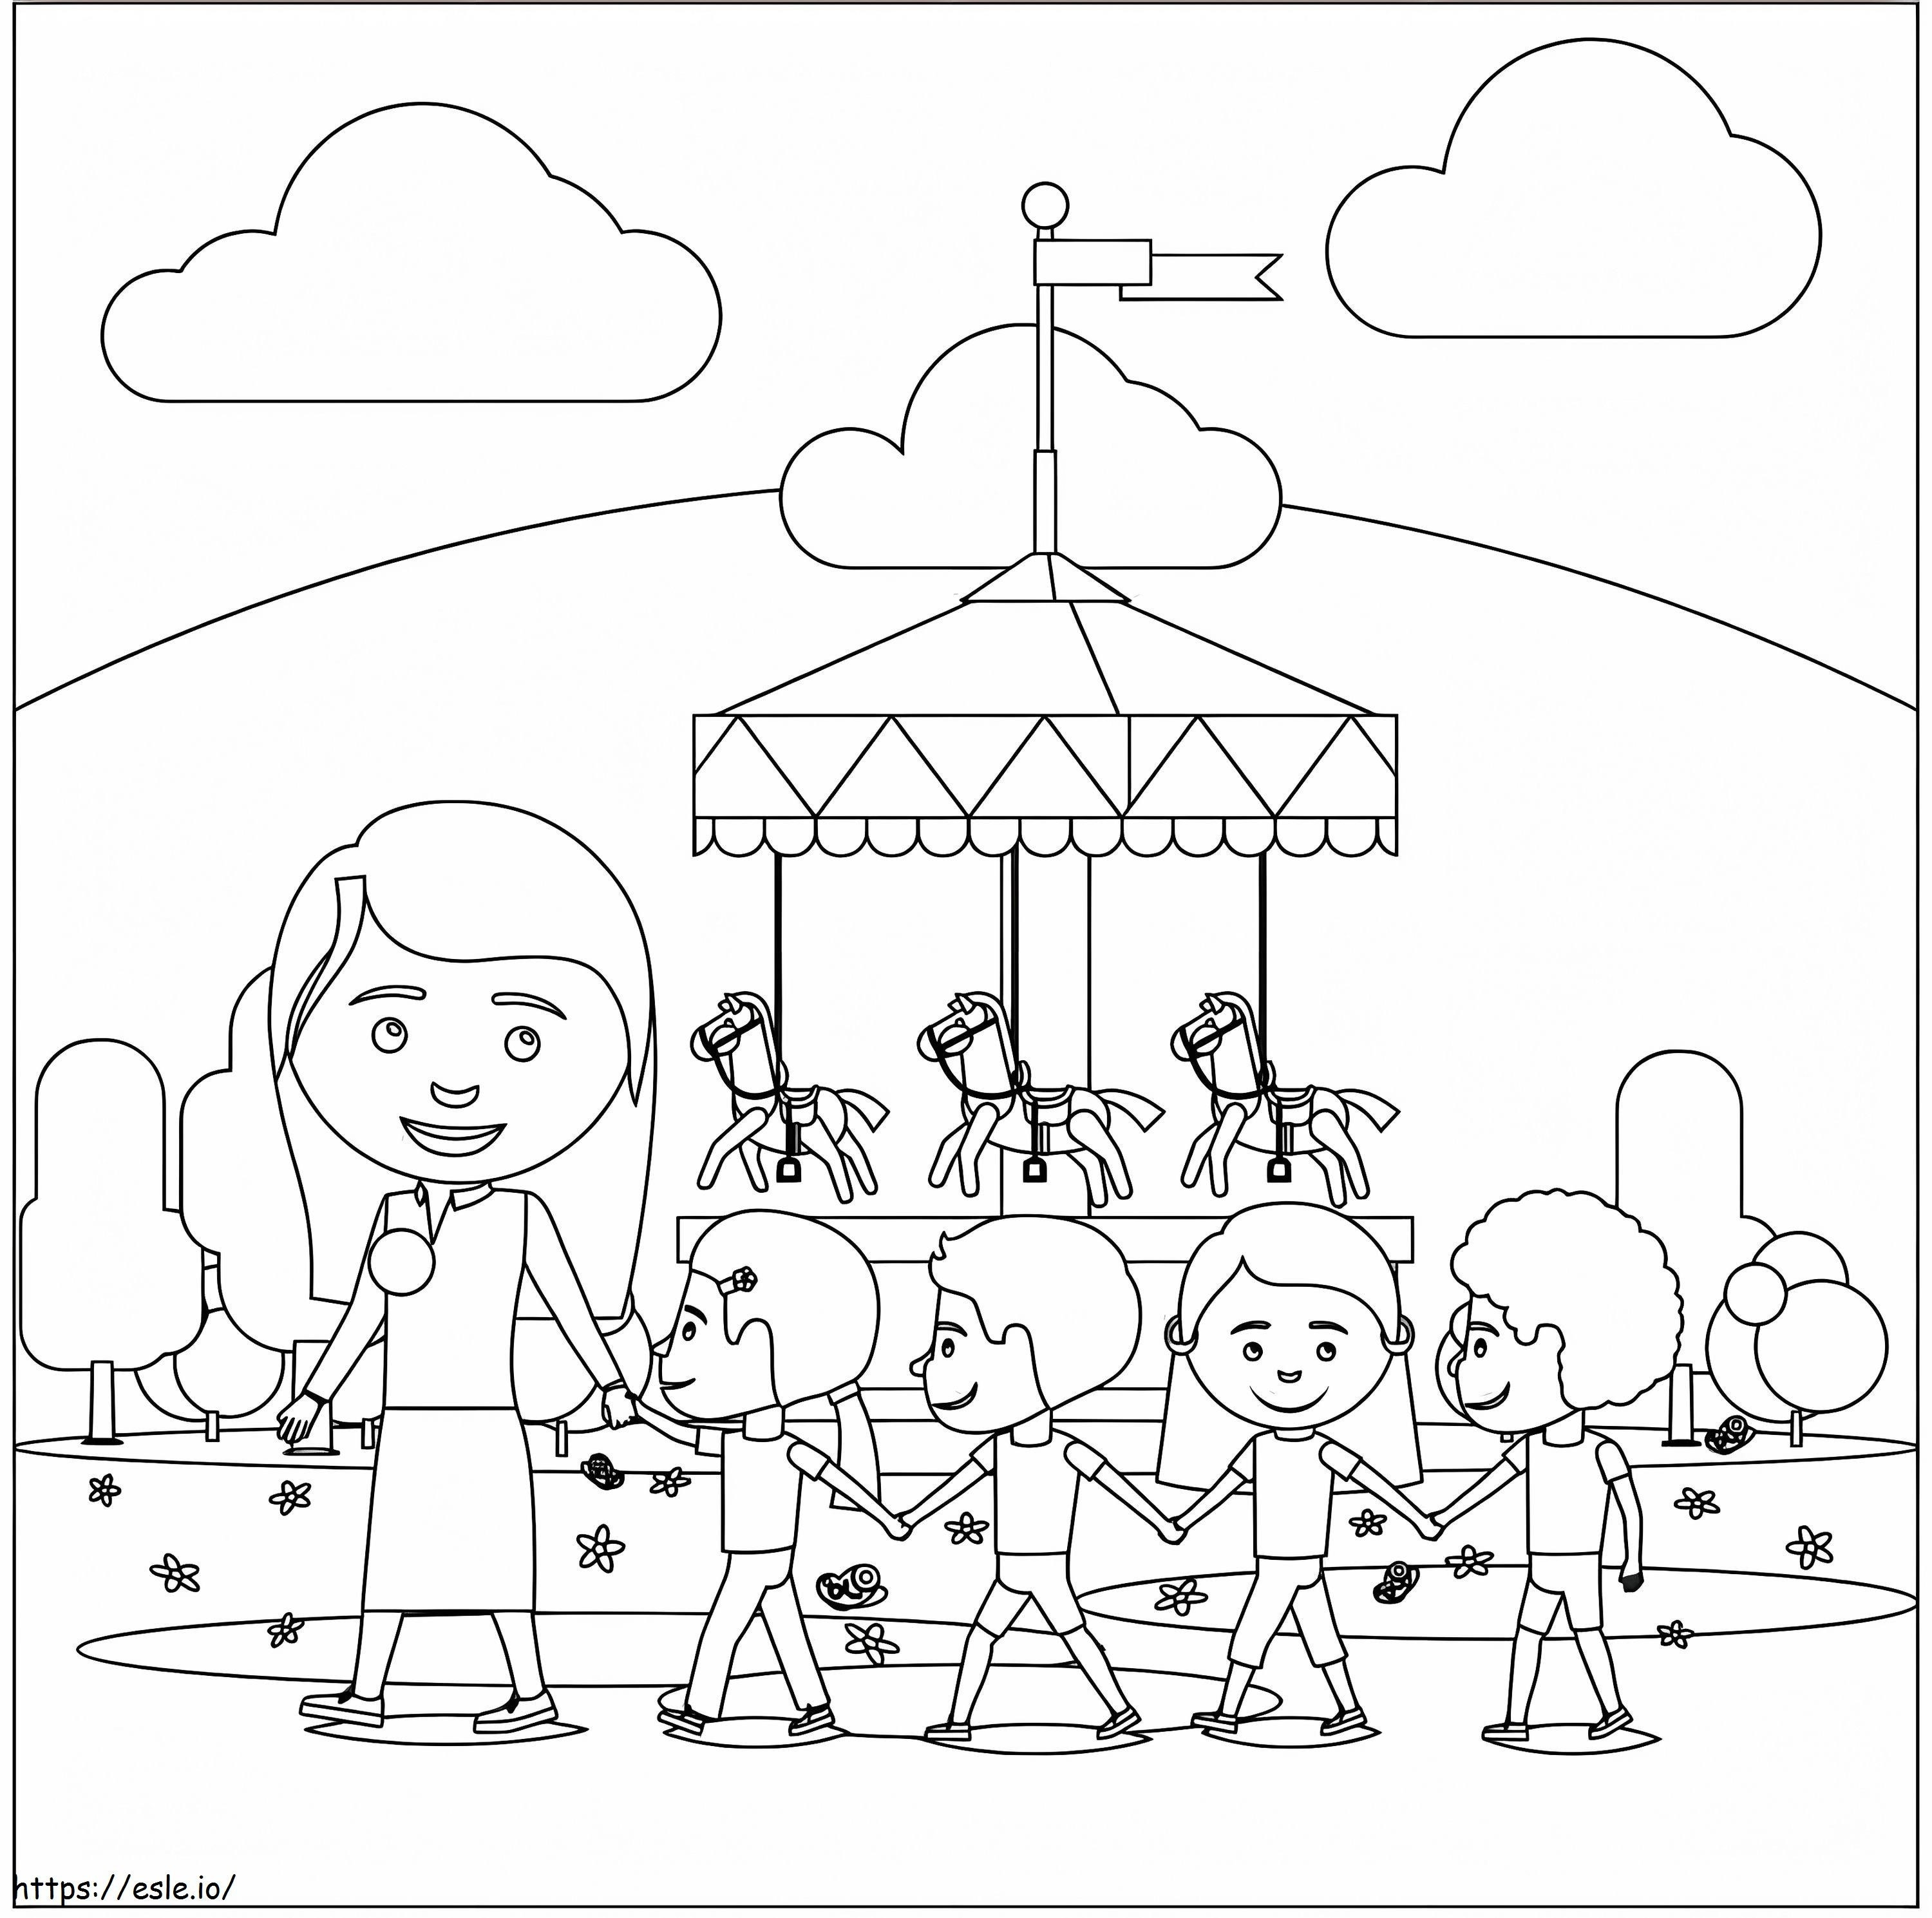 Children In The Park coloring page